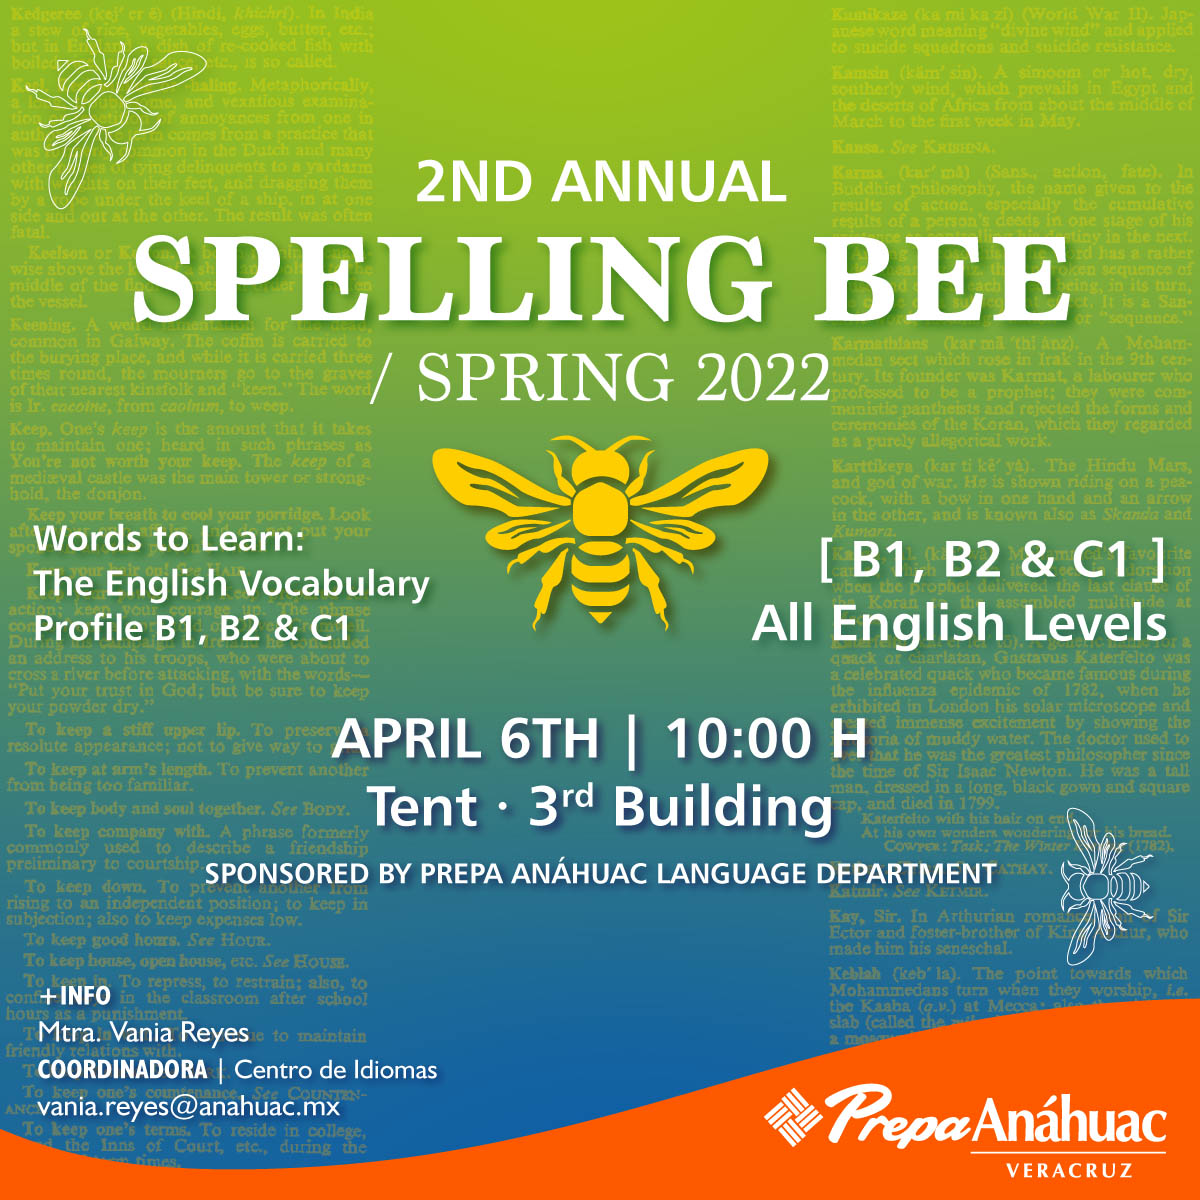 2nd Annual Spelling Bee Spring 2022